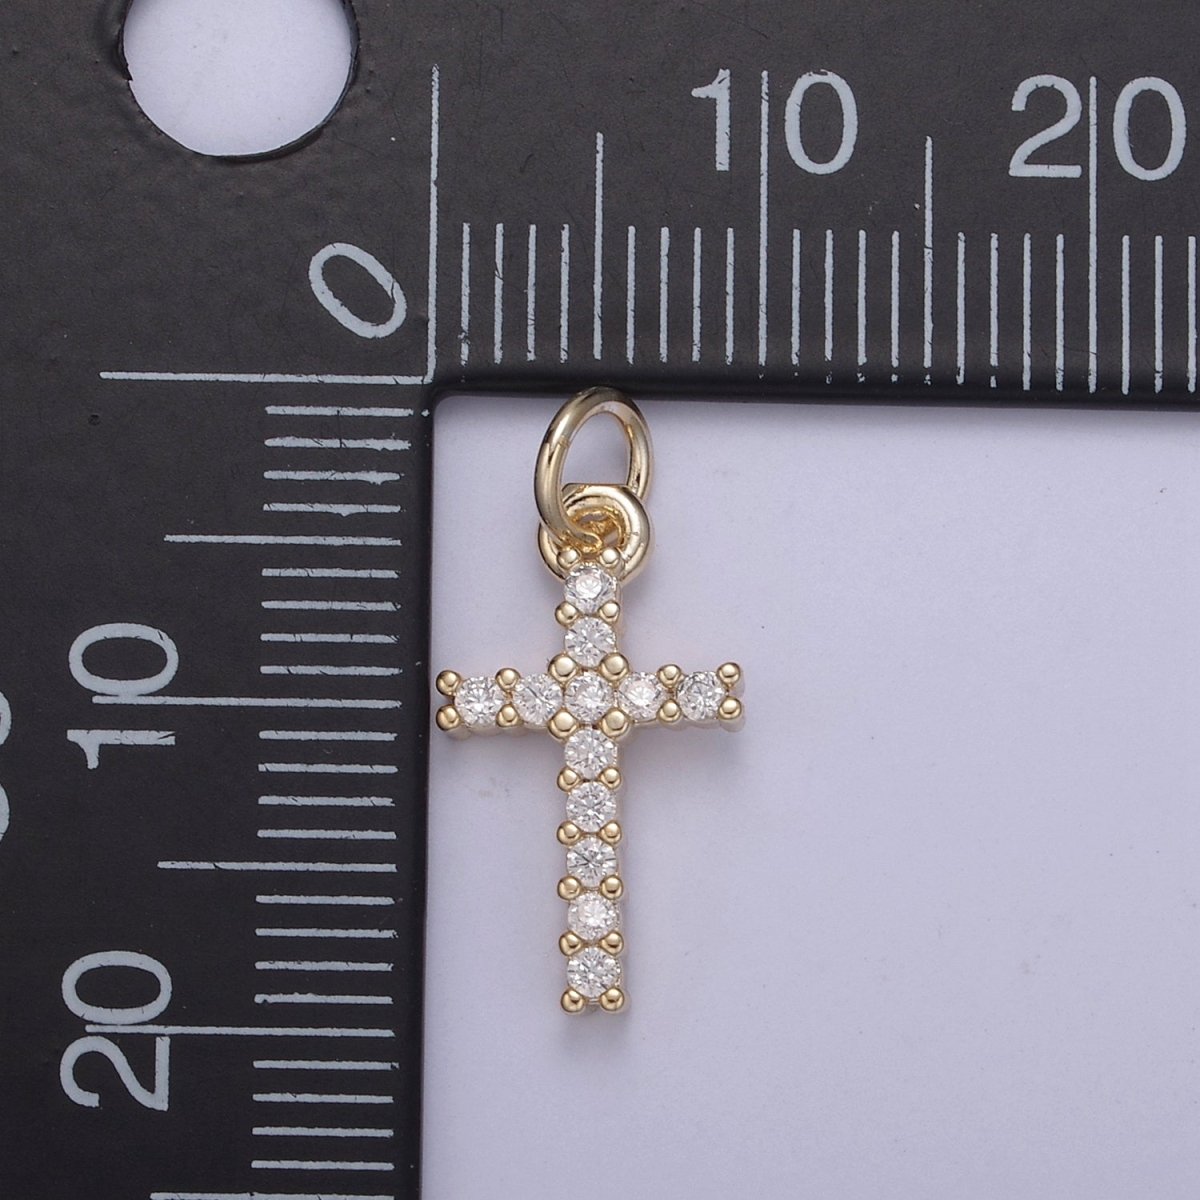 Dainty Cross Charms, Micro Pave Mini Cross, Religious Jewelry,14K Gold Filled Cross Charm Add on Pendant N-409 - DLUXCA